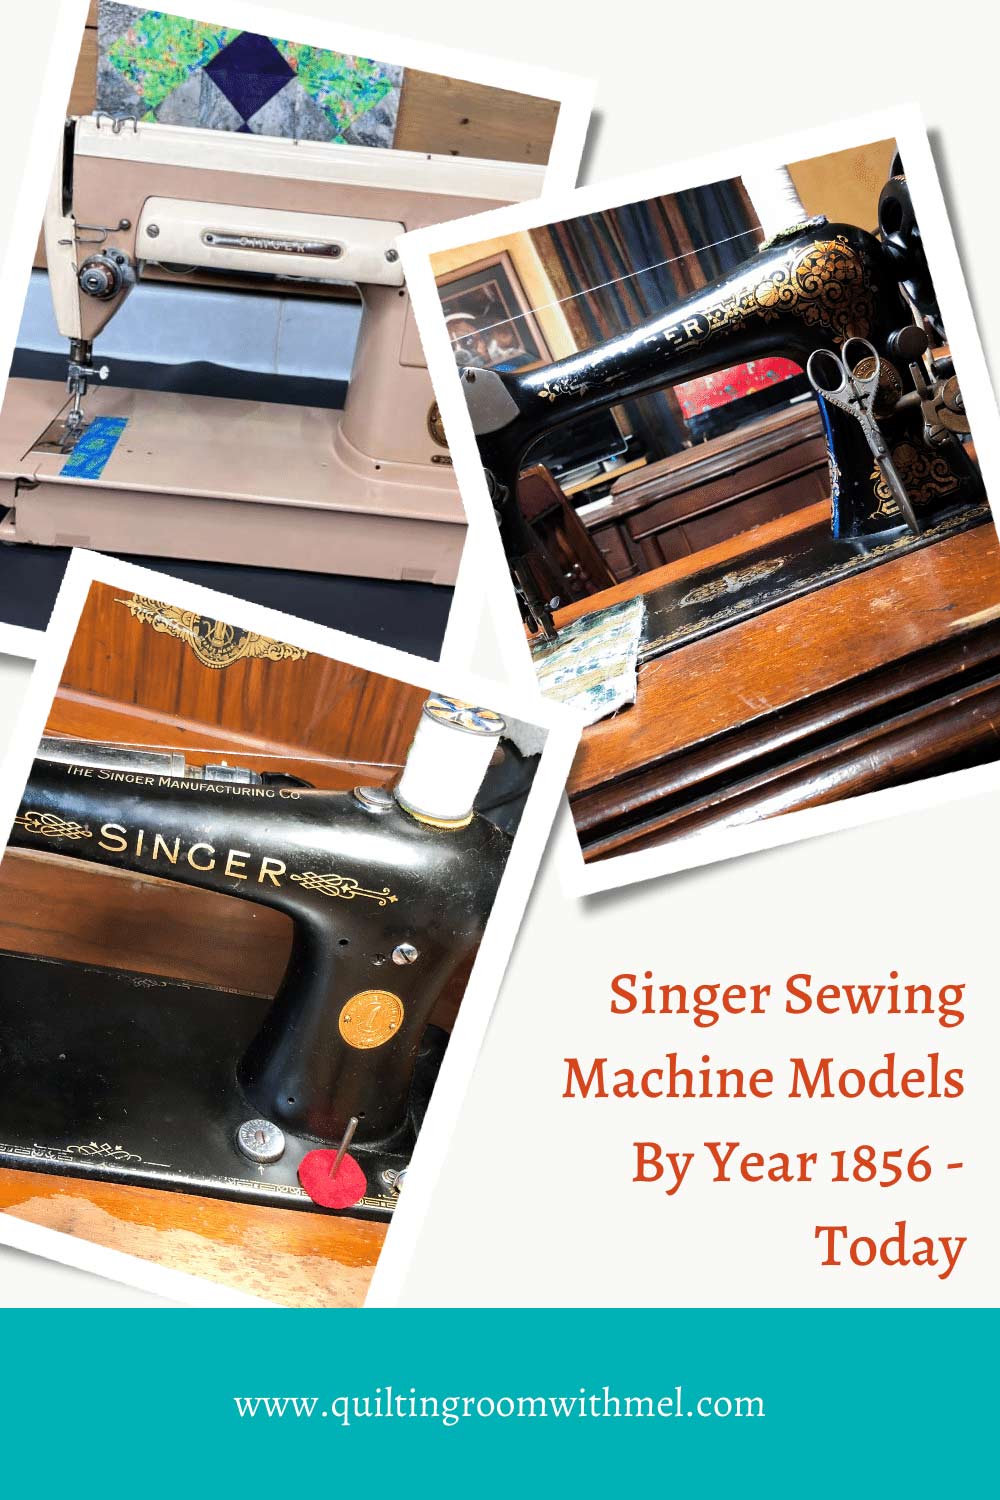 Learn when your Singer sewing machine was made with this list of Singer sewing machine models listed by year.